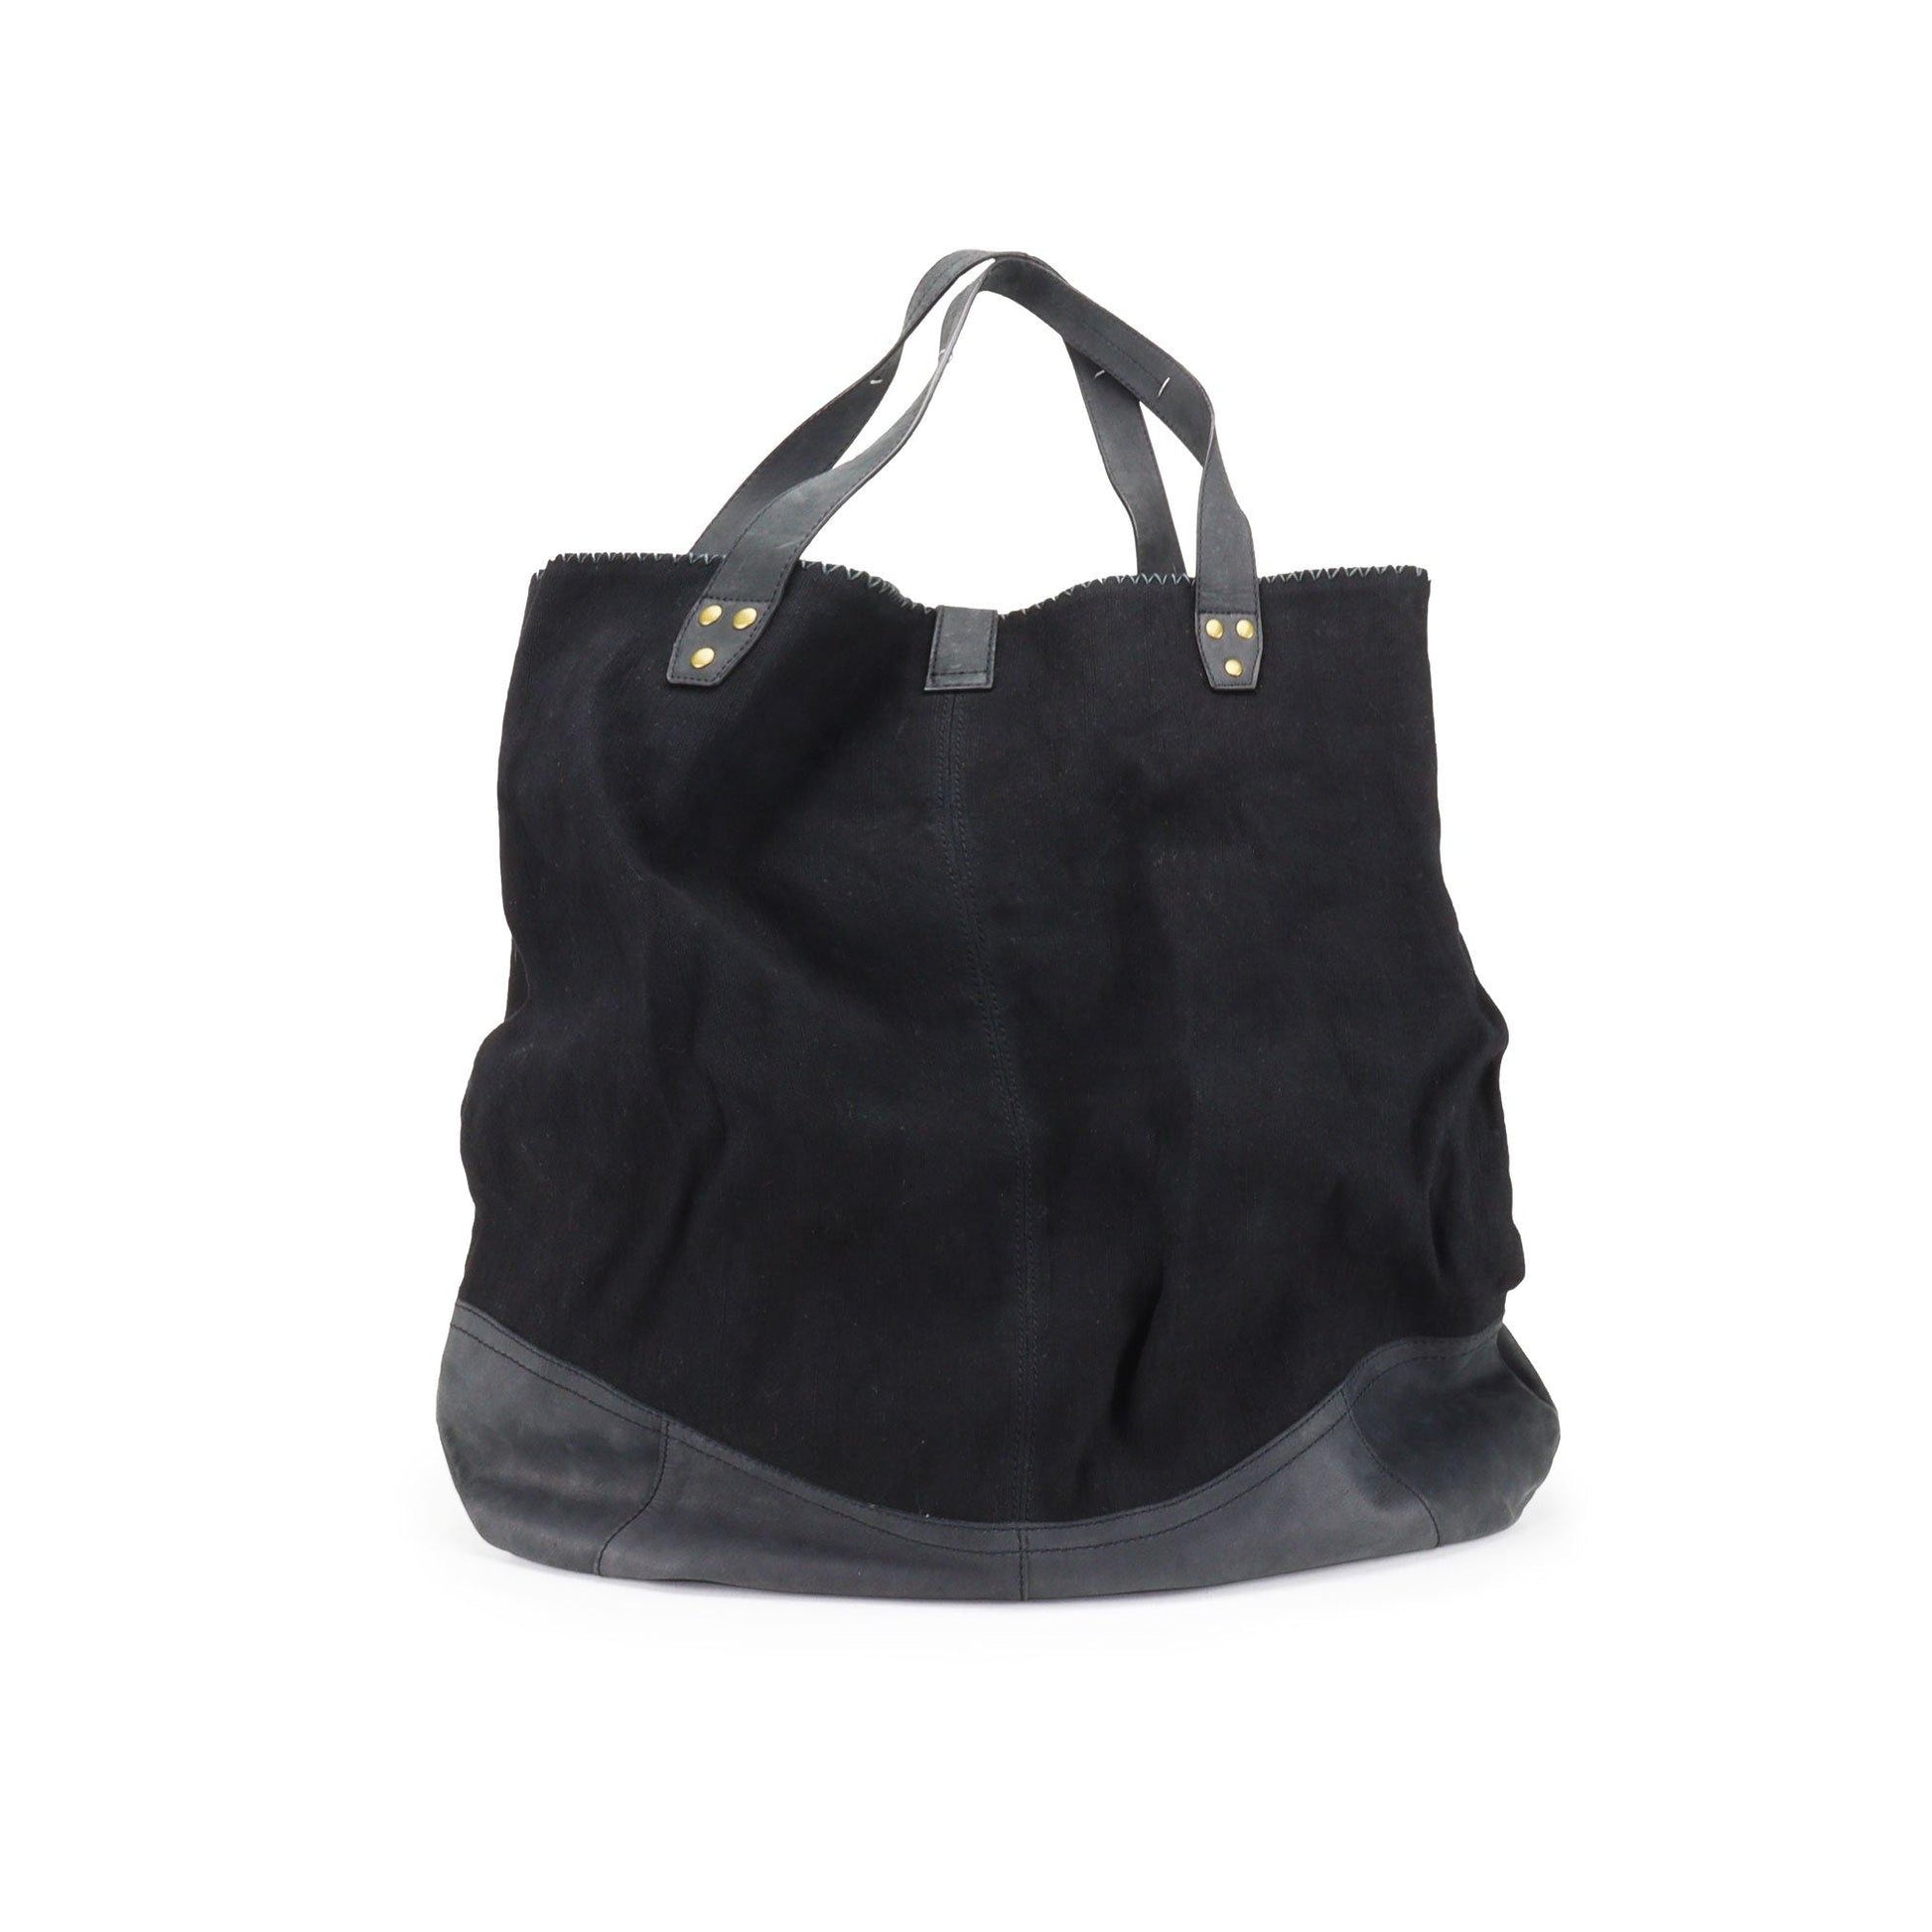 SOUTH HOUS EXCLUSIVE Bernardo Hemp Leather Oversized Tote Bag Black LIMITED EDITION Other View